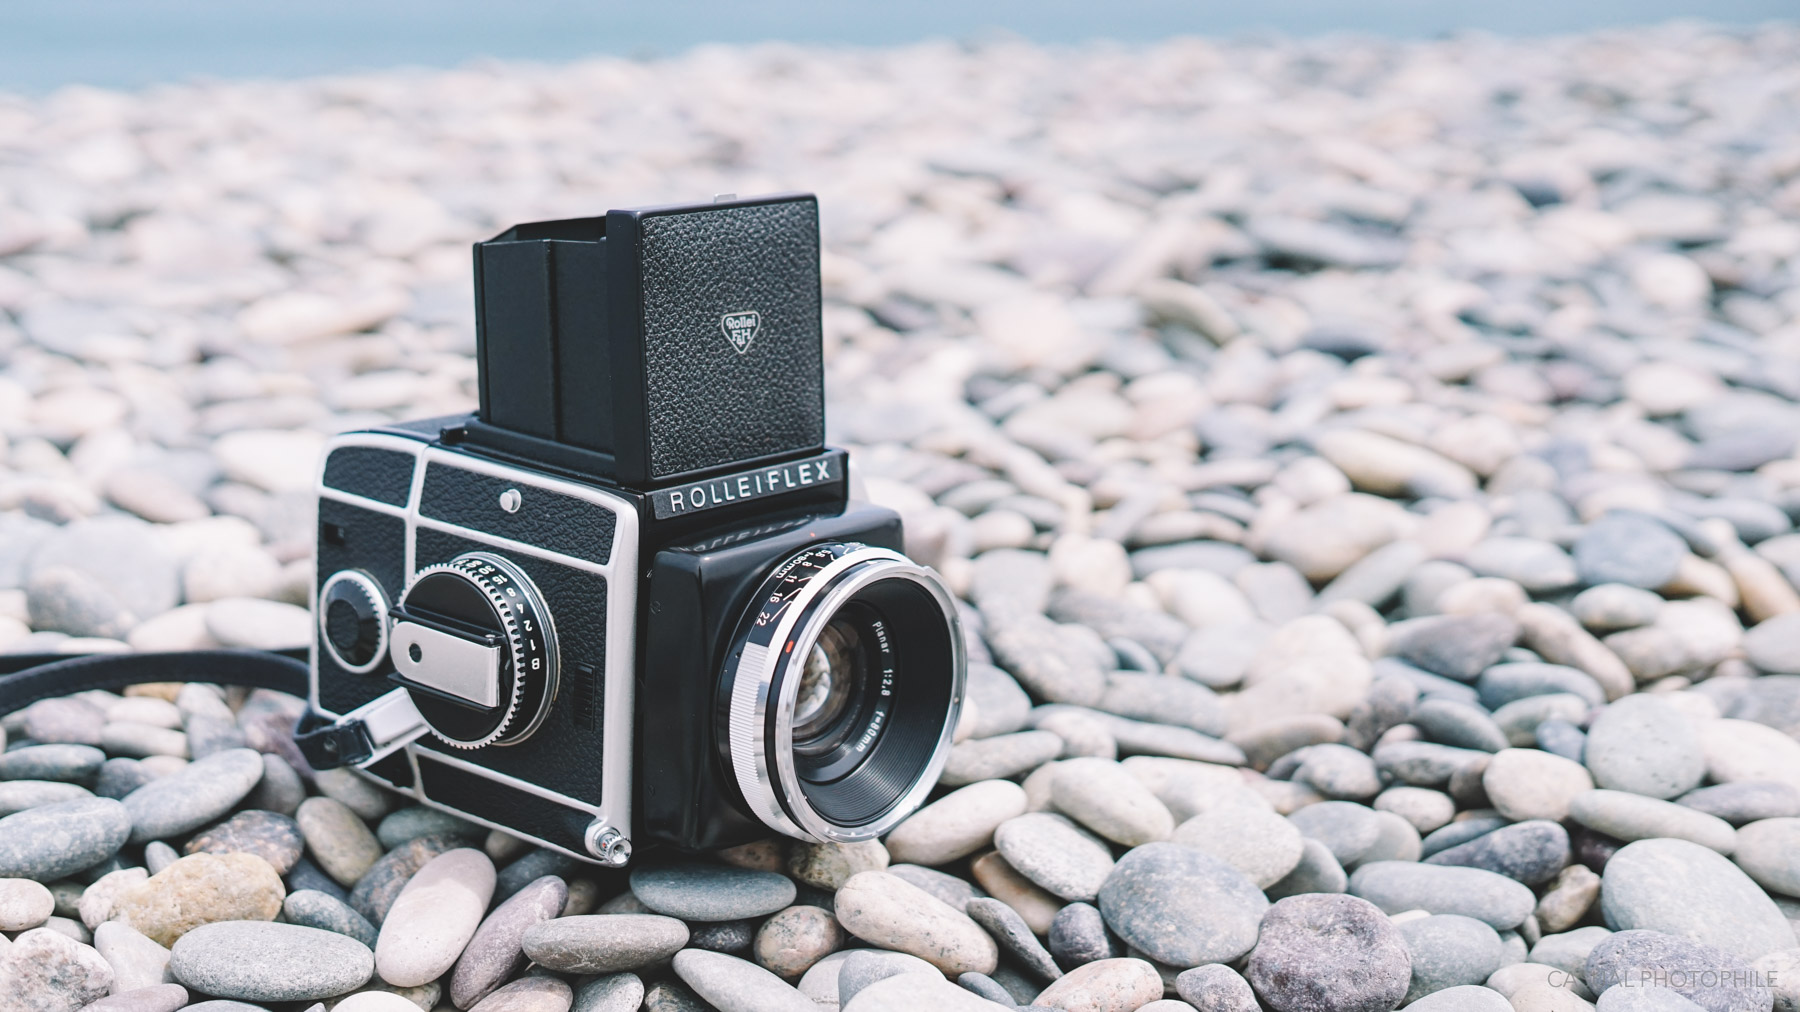 Rolleiflex SL66 Camera Review - Casual Photophile